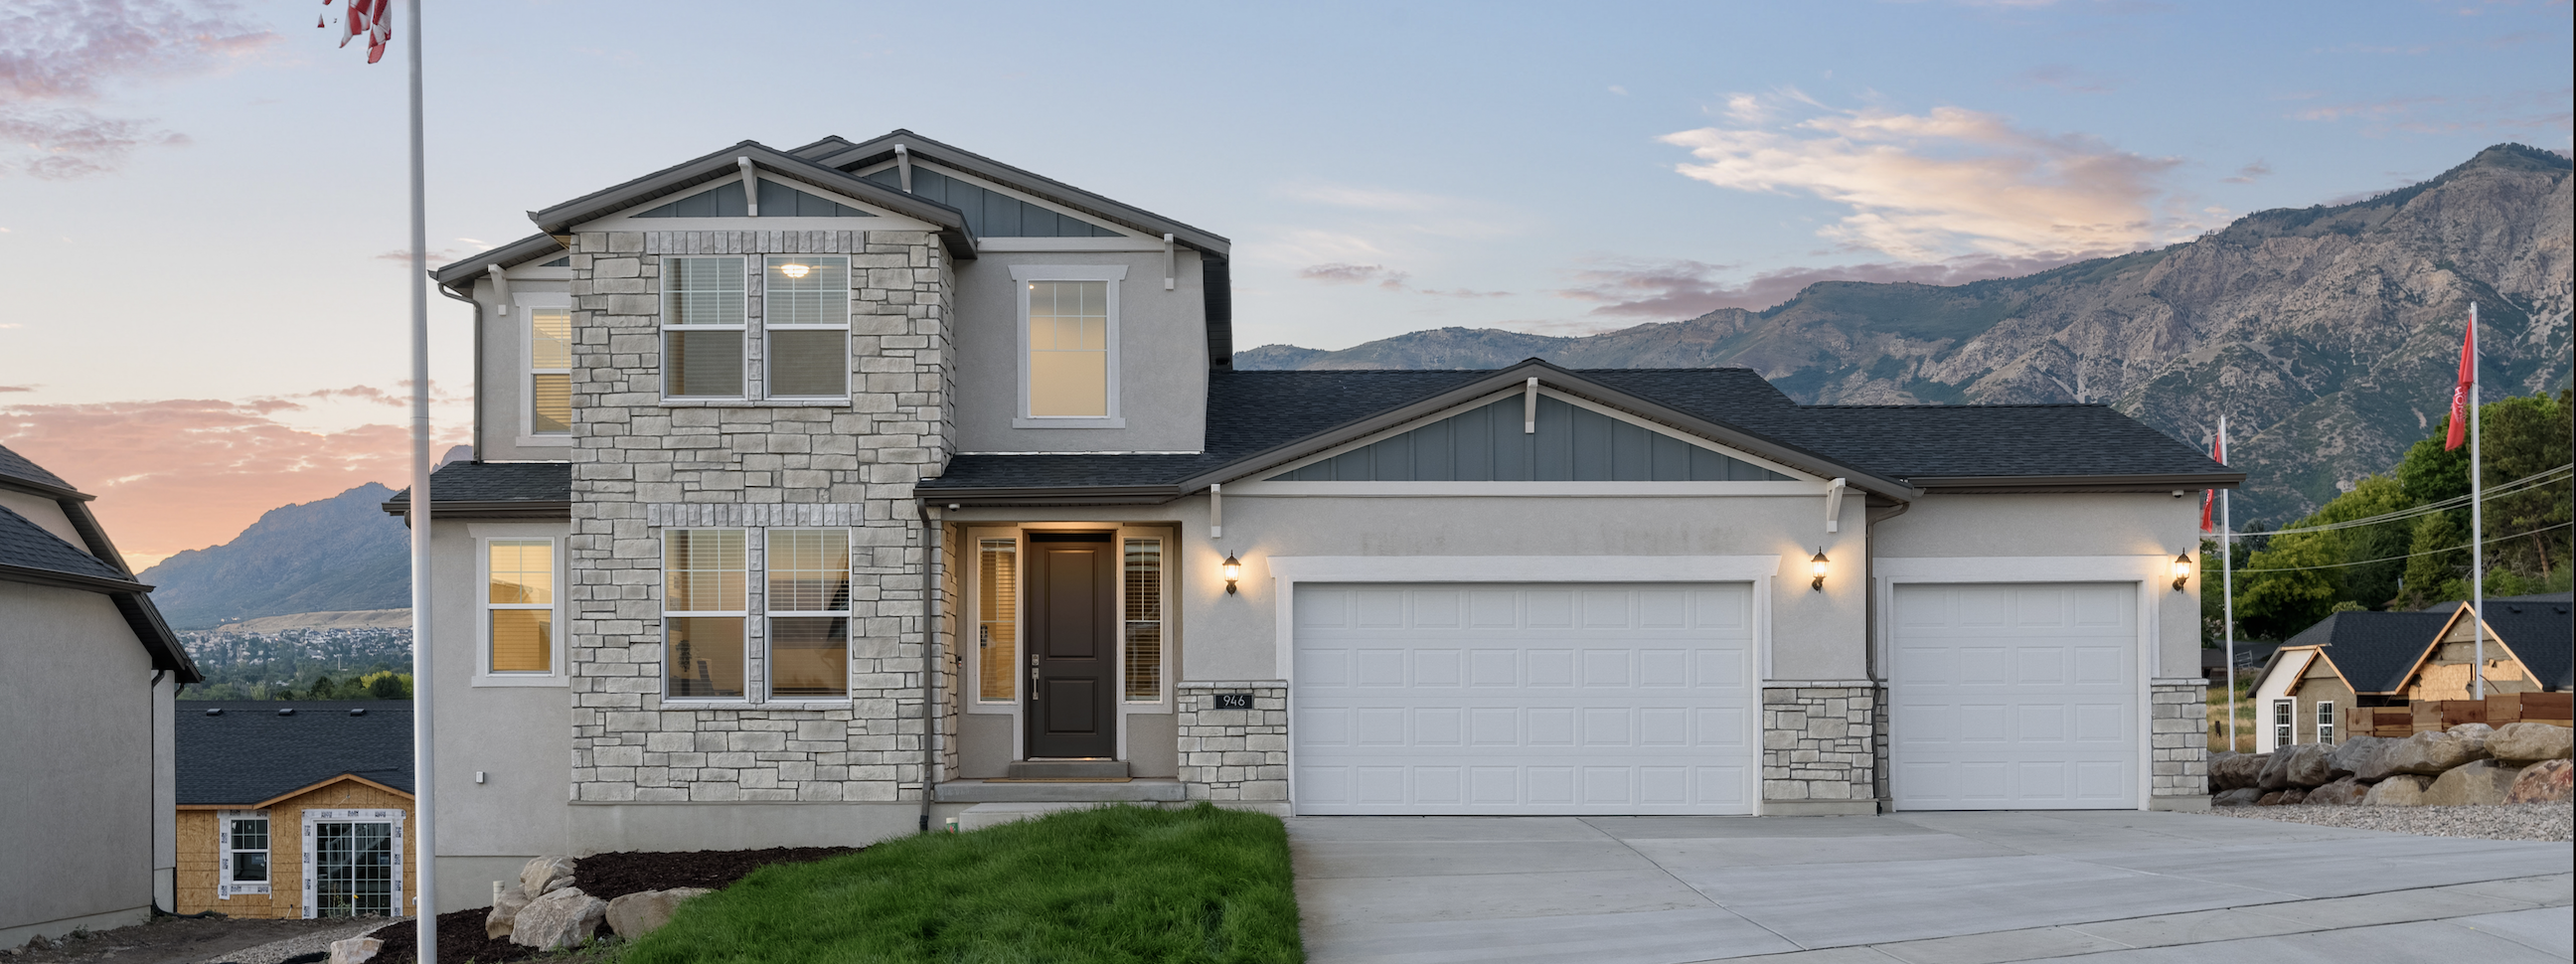 New Release Ward Farms in North Ogden